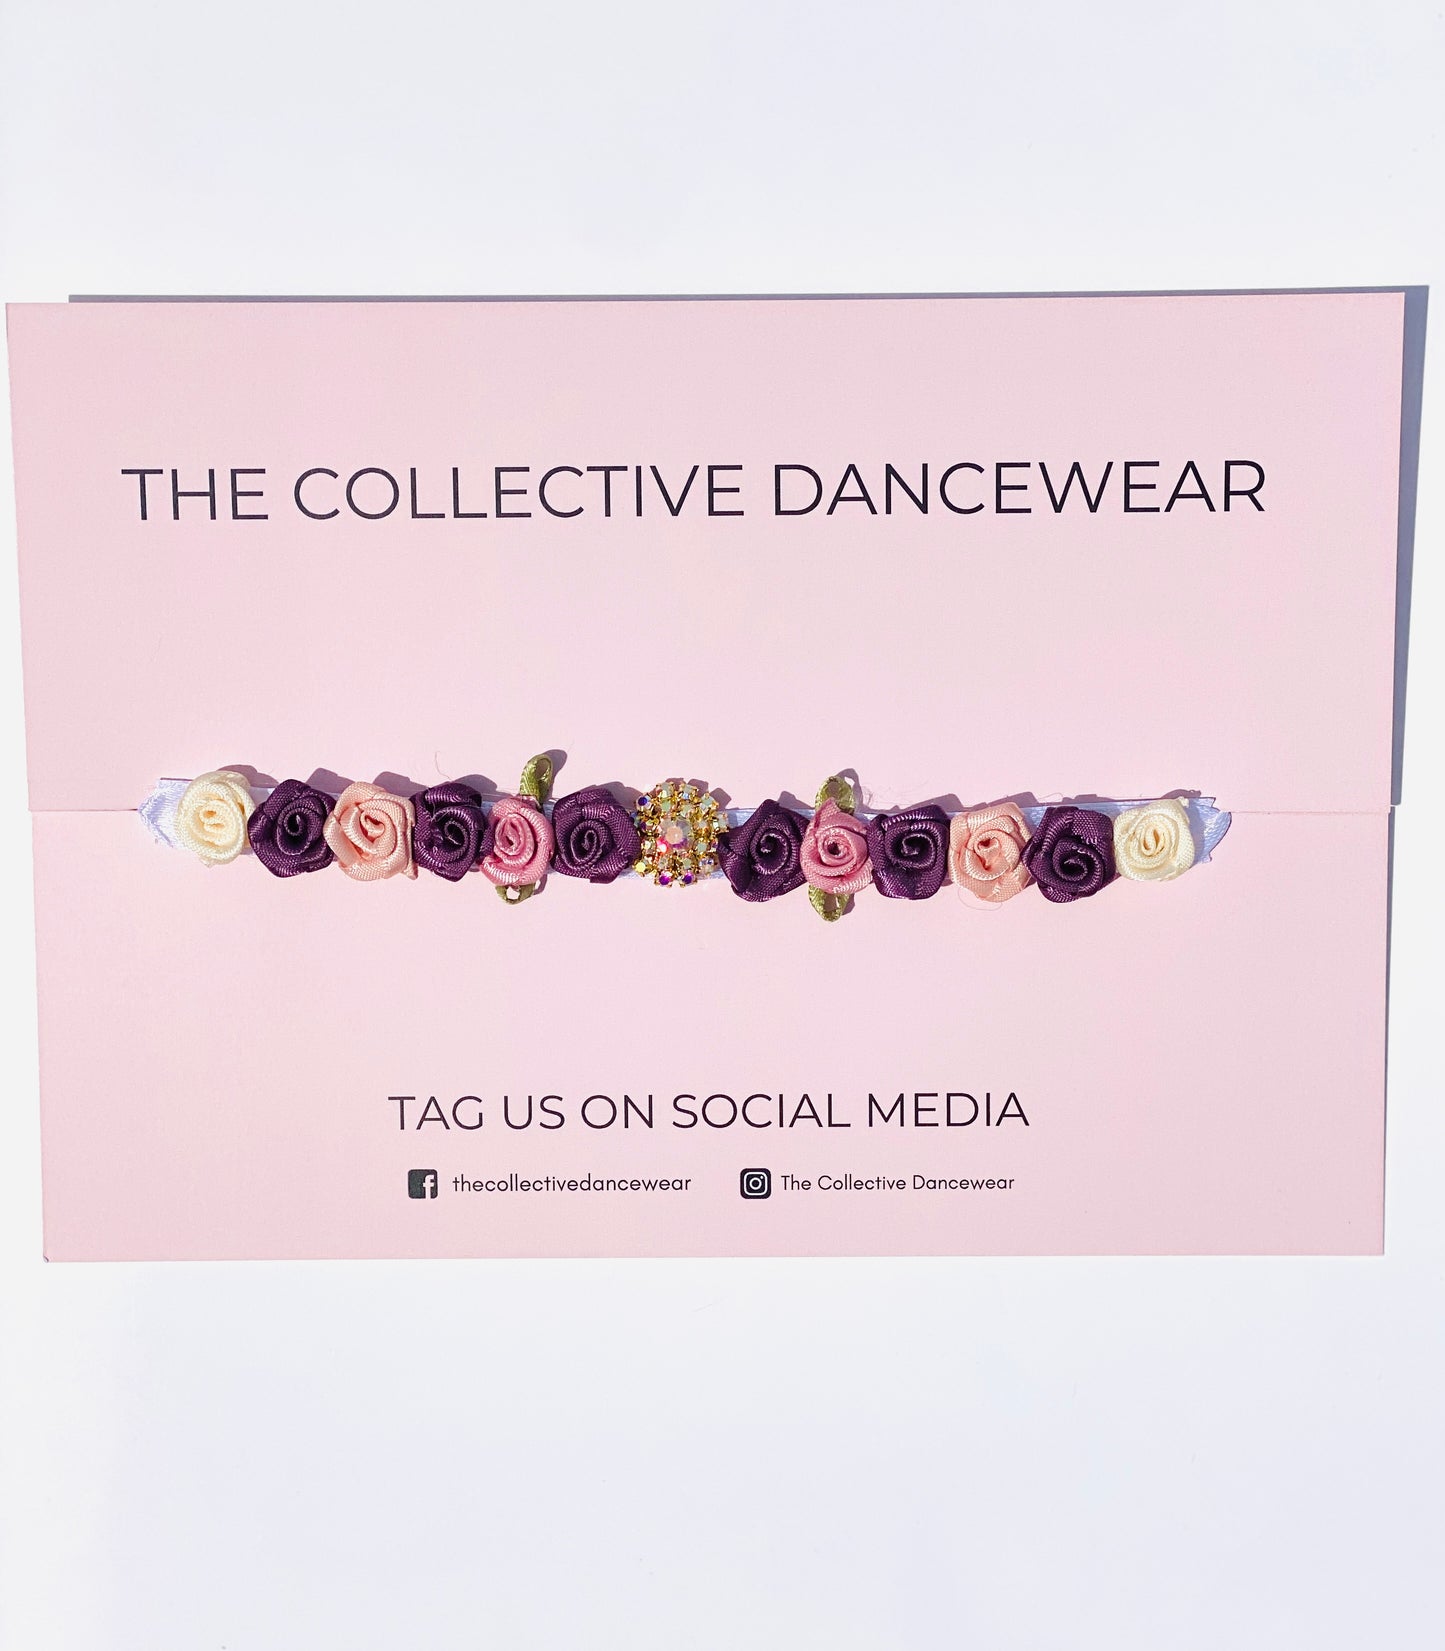 Ballet bun wrap the deep purple and pink Rose from The Collective Dancewear